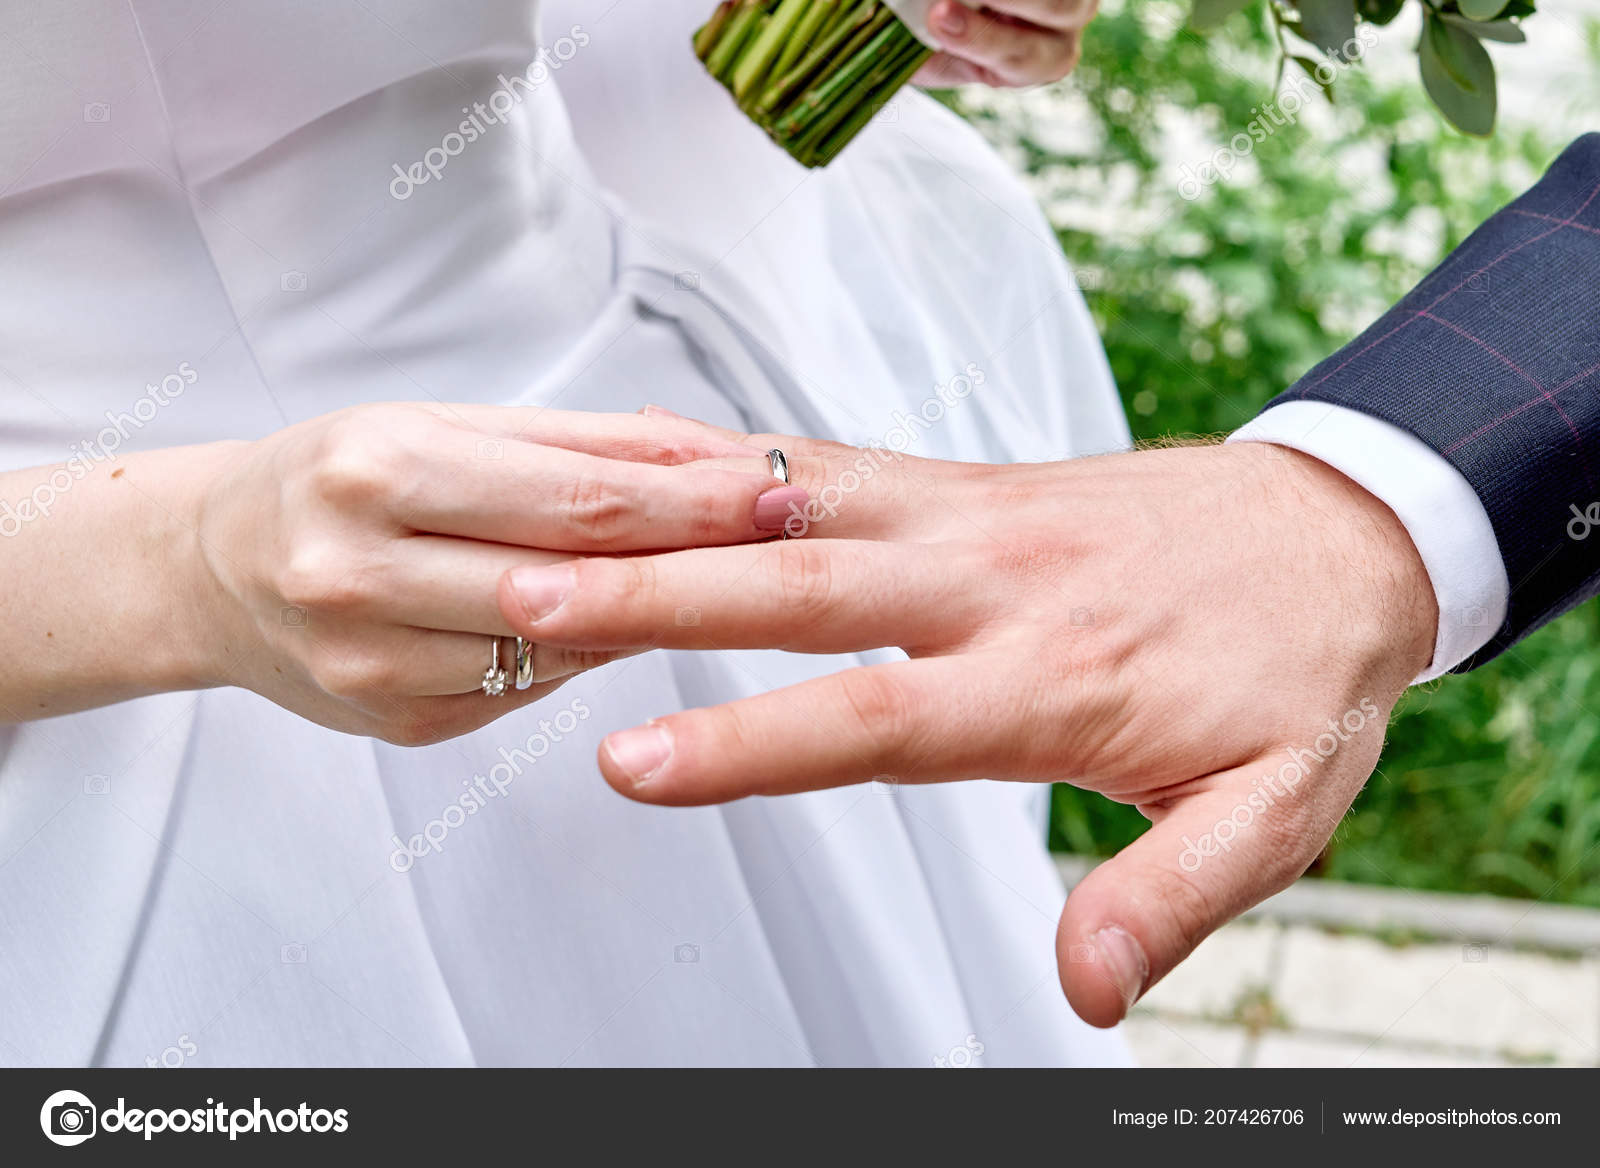 Hands of bride and groom tied Wedding towel, close up. The priest binds the  bride's hand towel. Brides at a wedding ceremony in a church - Stock Image  - Everypixel